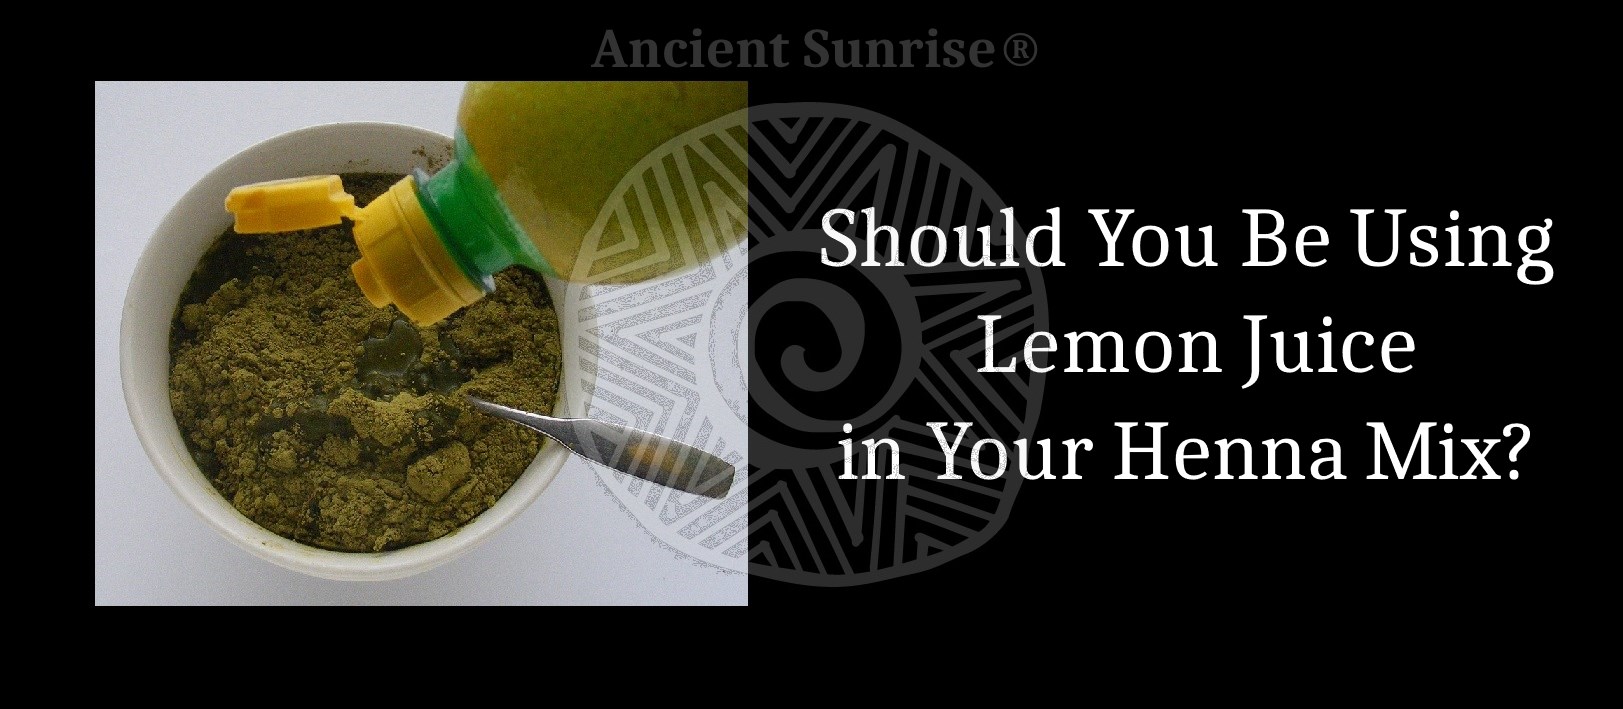 Should You Be Using Lemon Juice In Your Henna Mix?